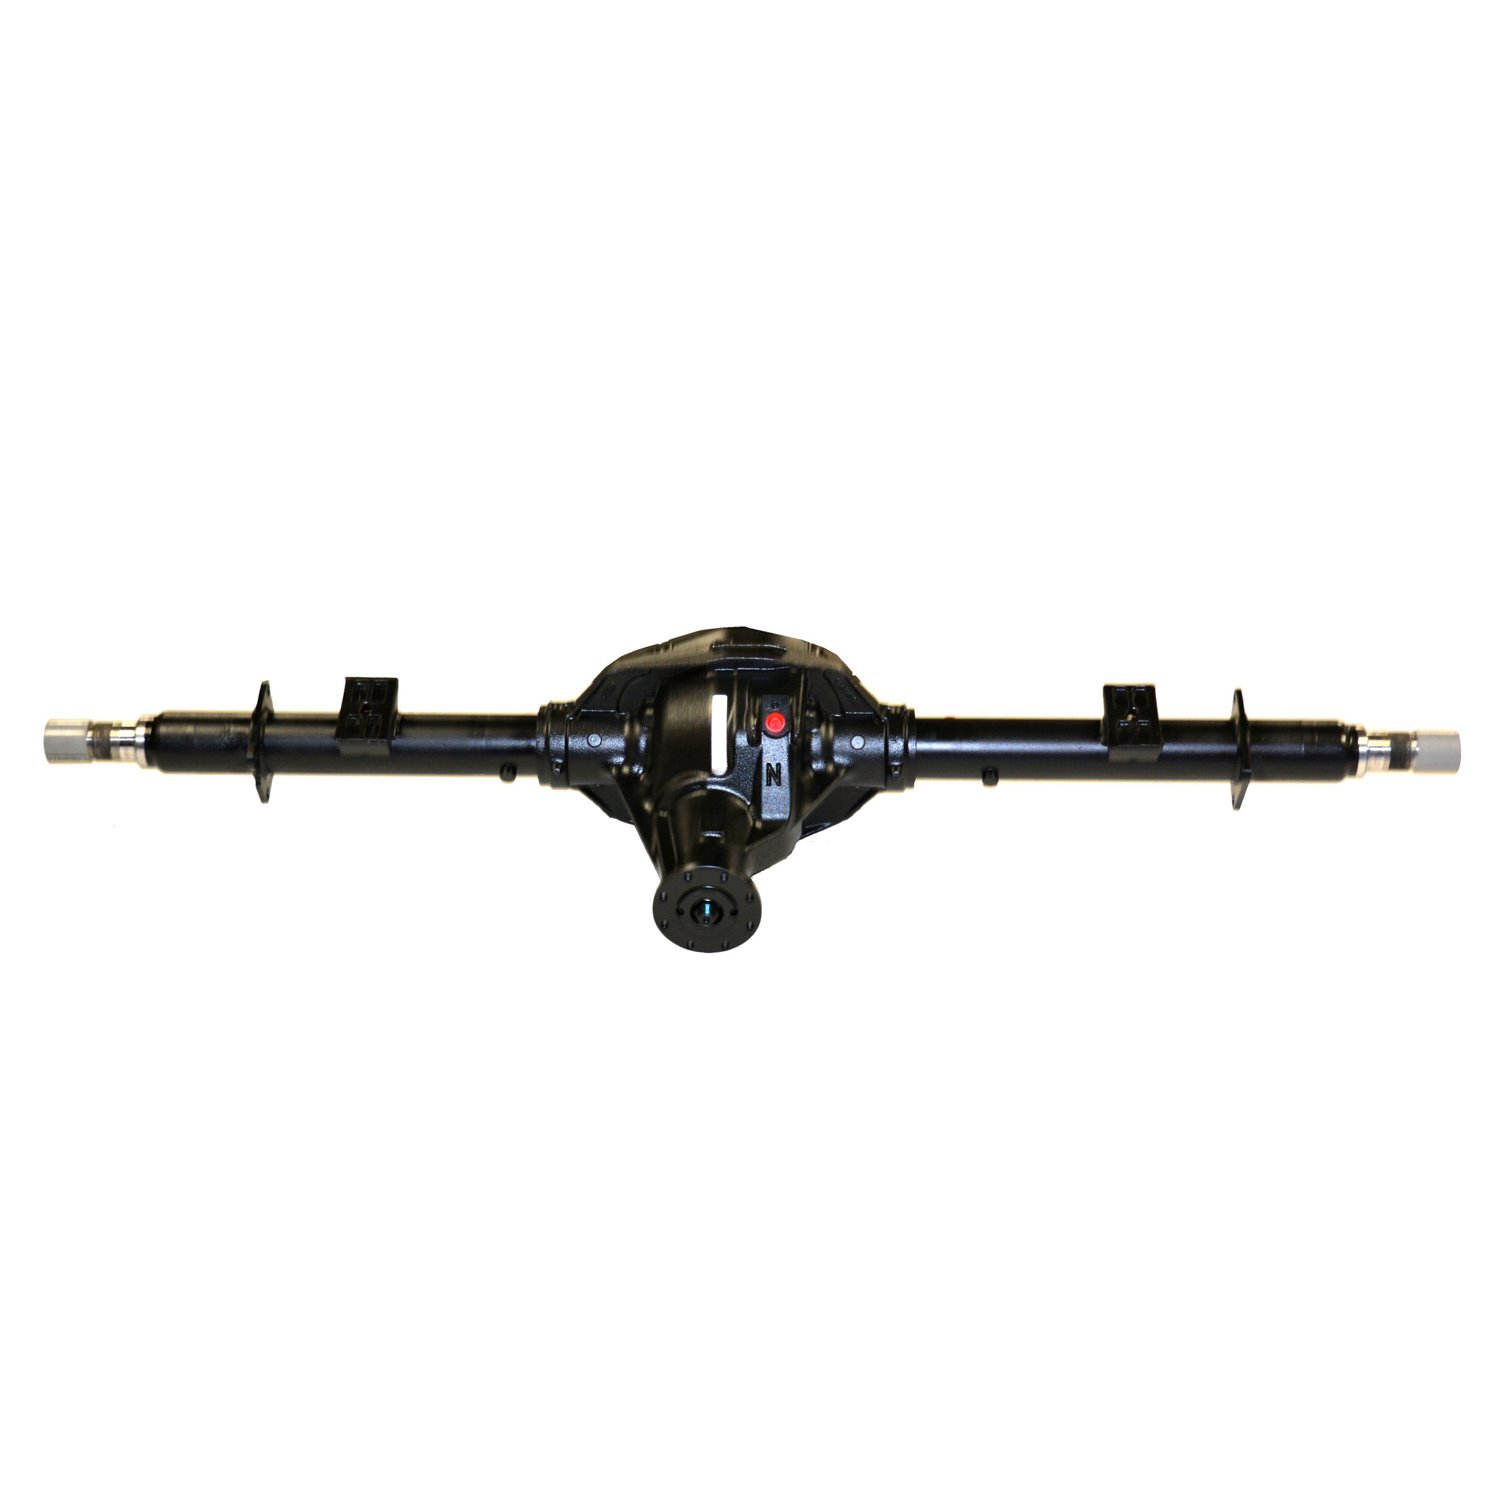 Remanufactured Complete Axle Assembly for Ford 10.25" 87-97 Ford F350 3.55 Ratio, DRW